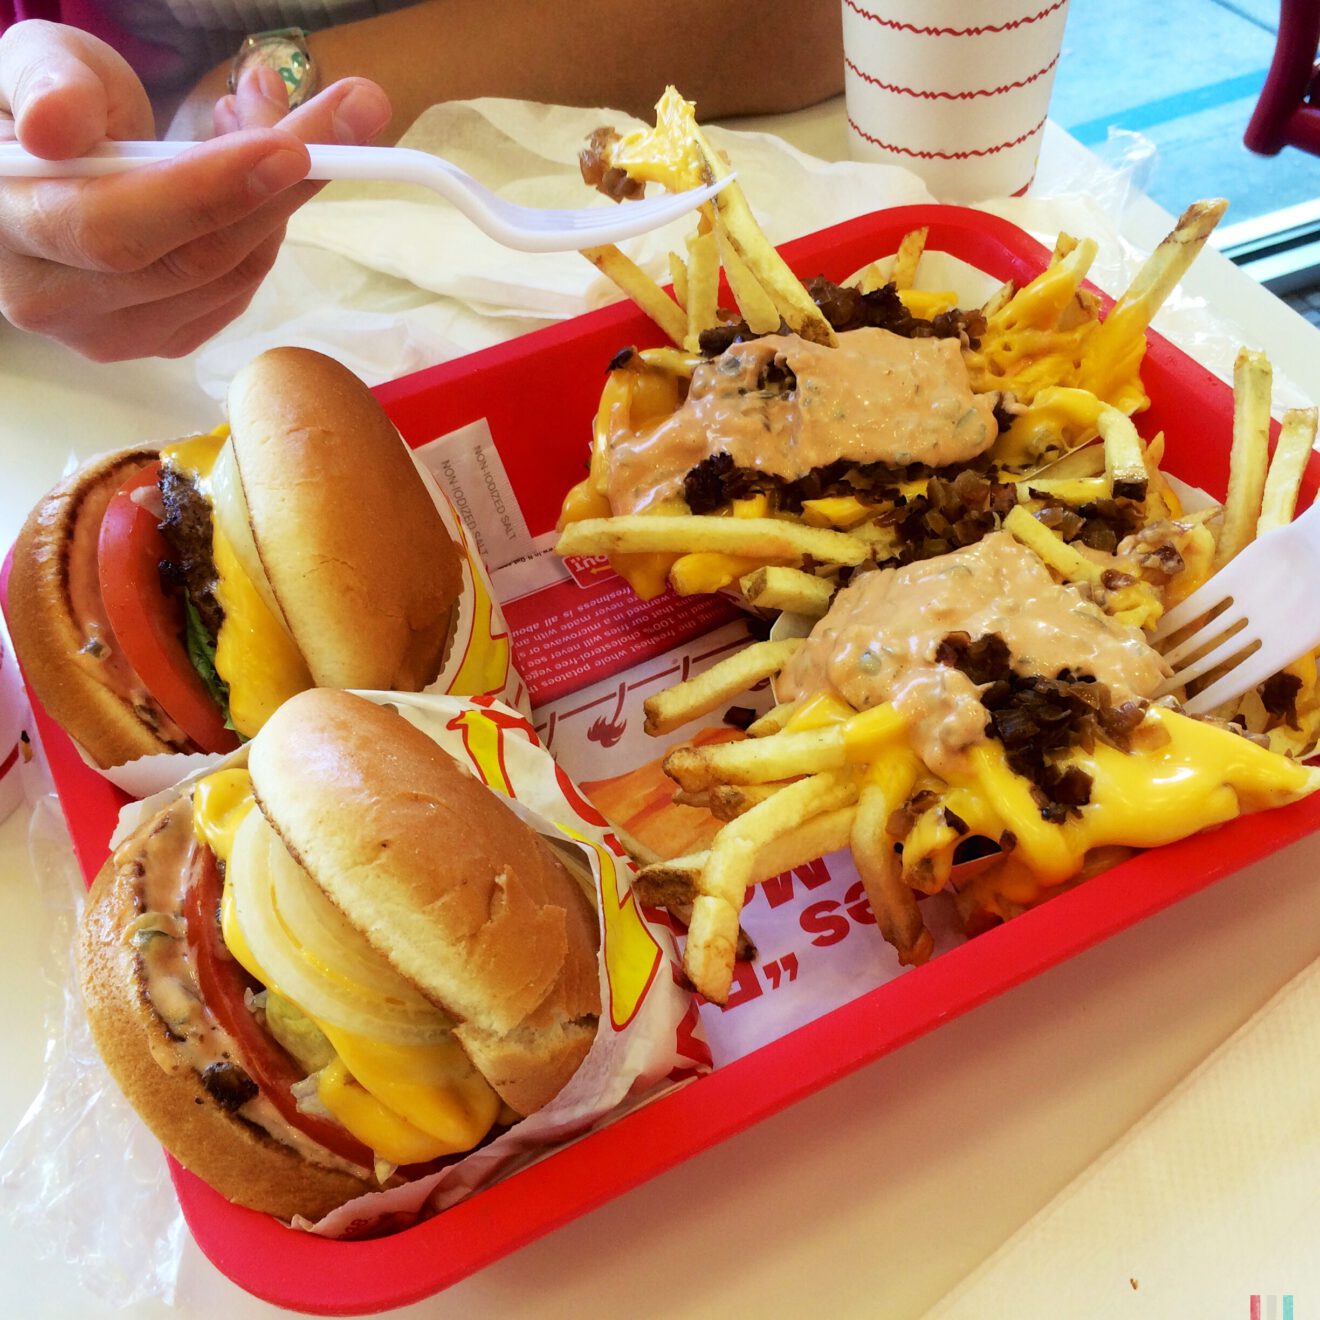 Holiday treats, news from In-N-Out drew SmartBrief readers this week